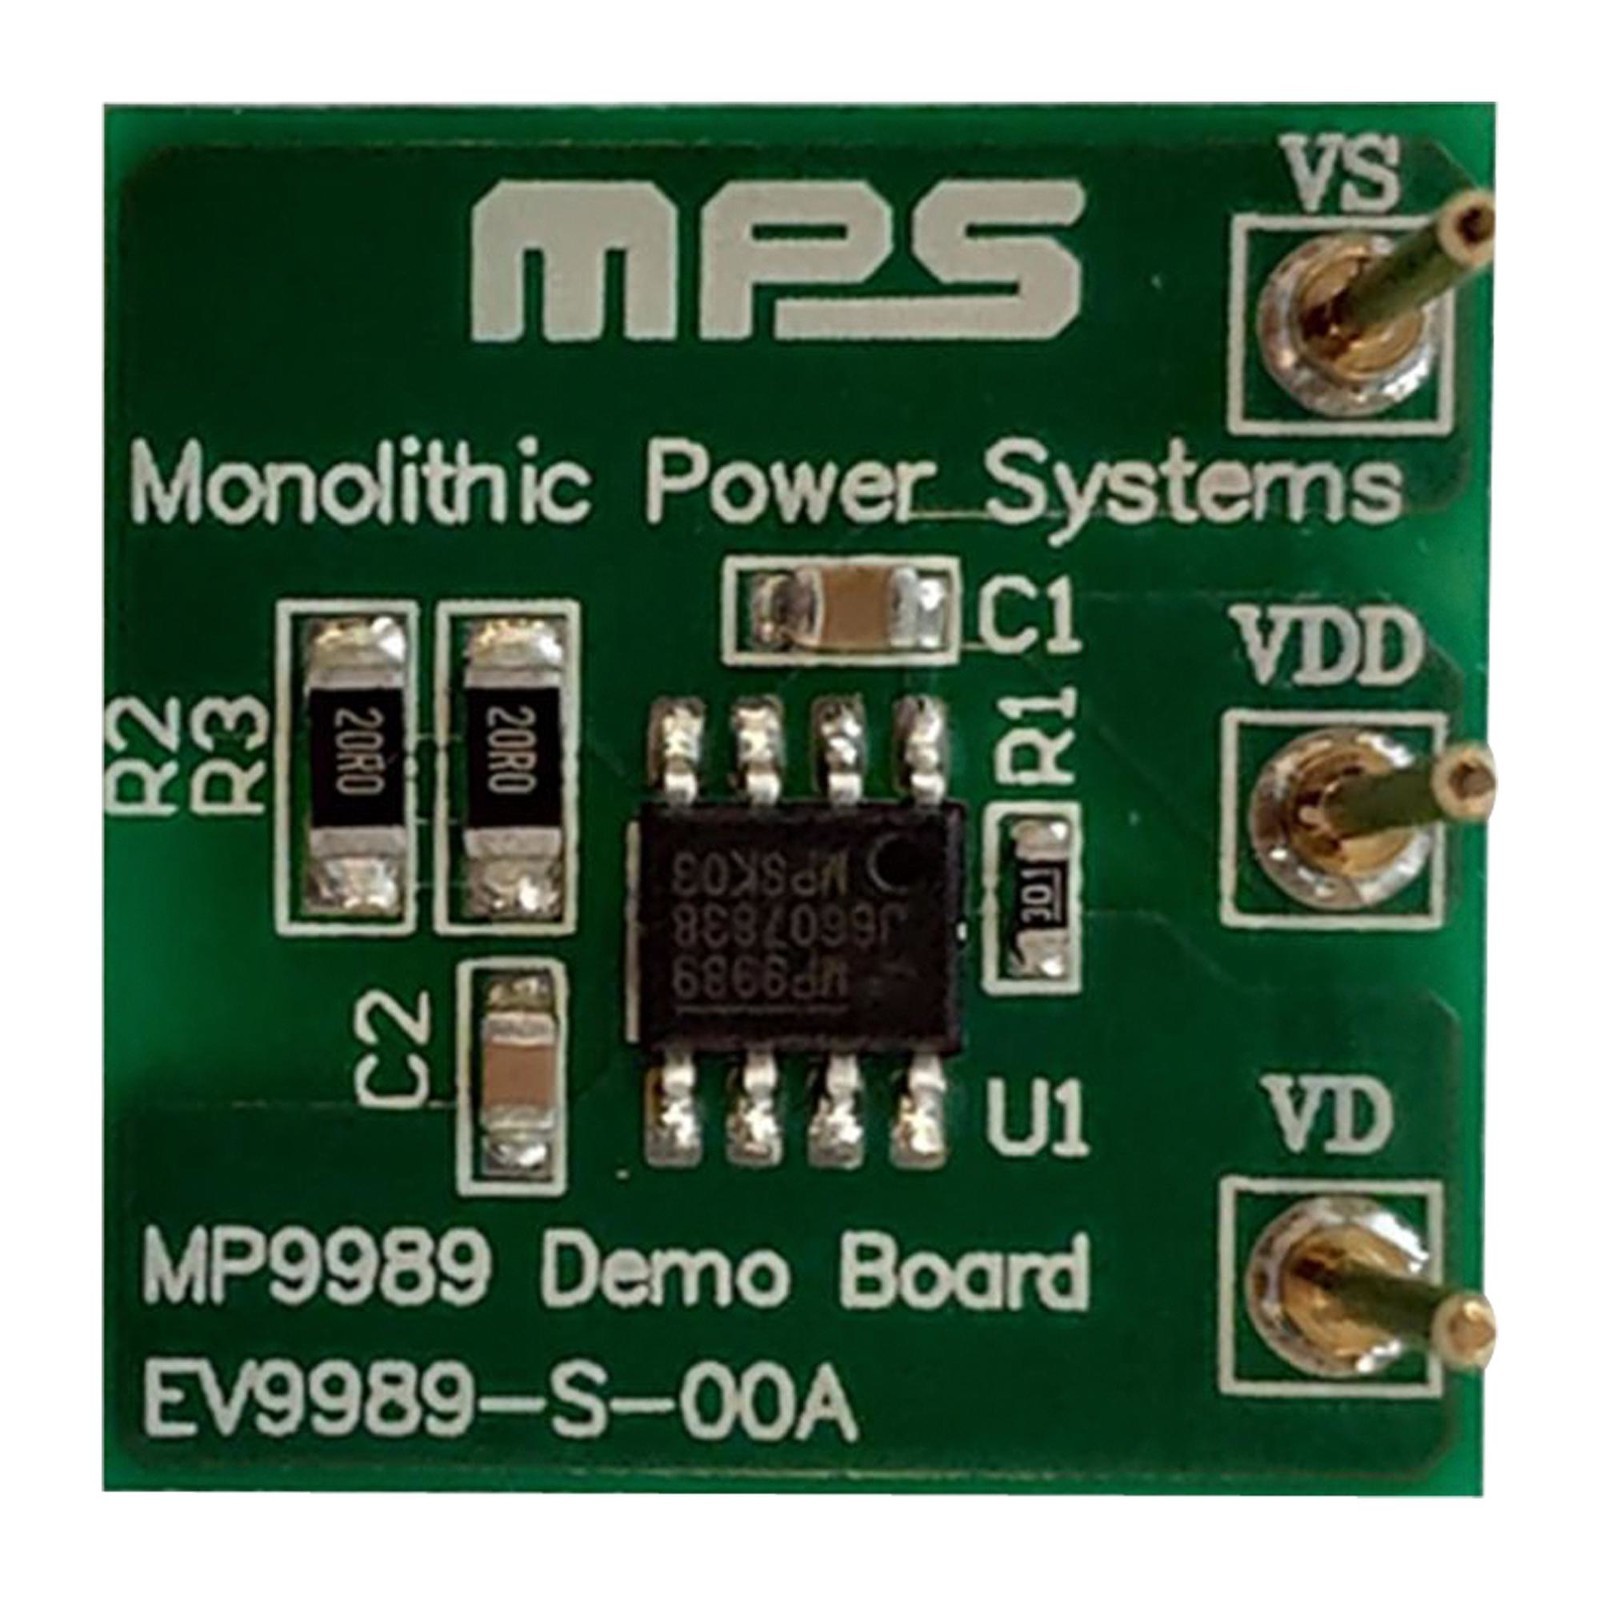 Monolithic Power Systems (Mps) Ev9989-S-00A Eval Board, Rectifier, Flyback Converter